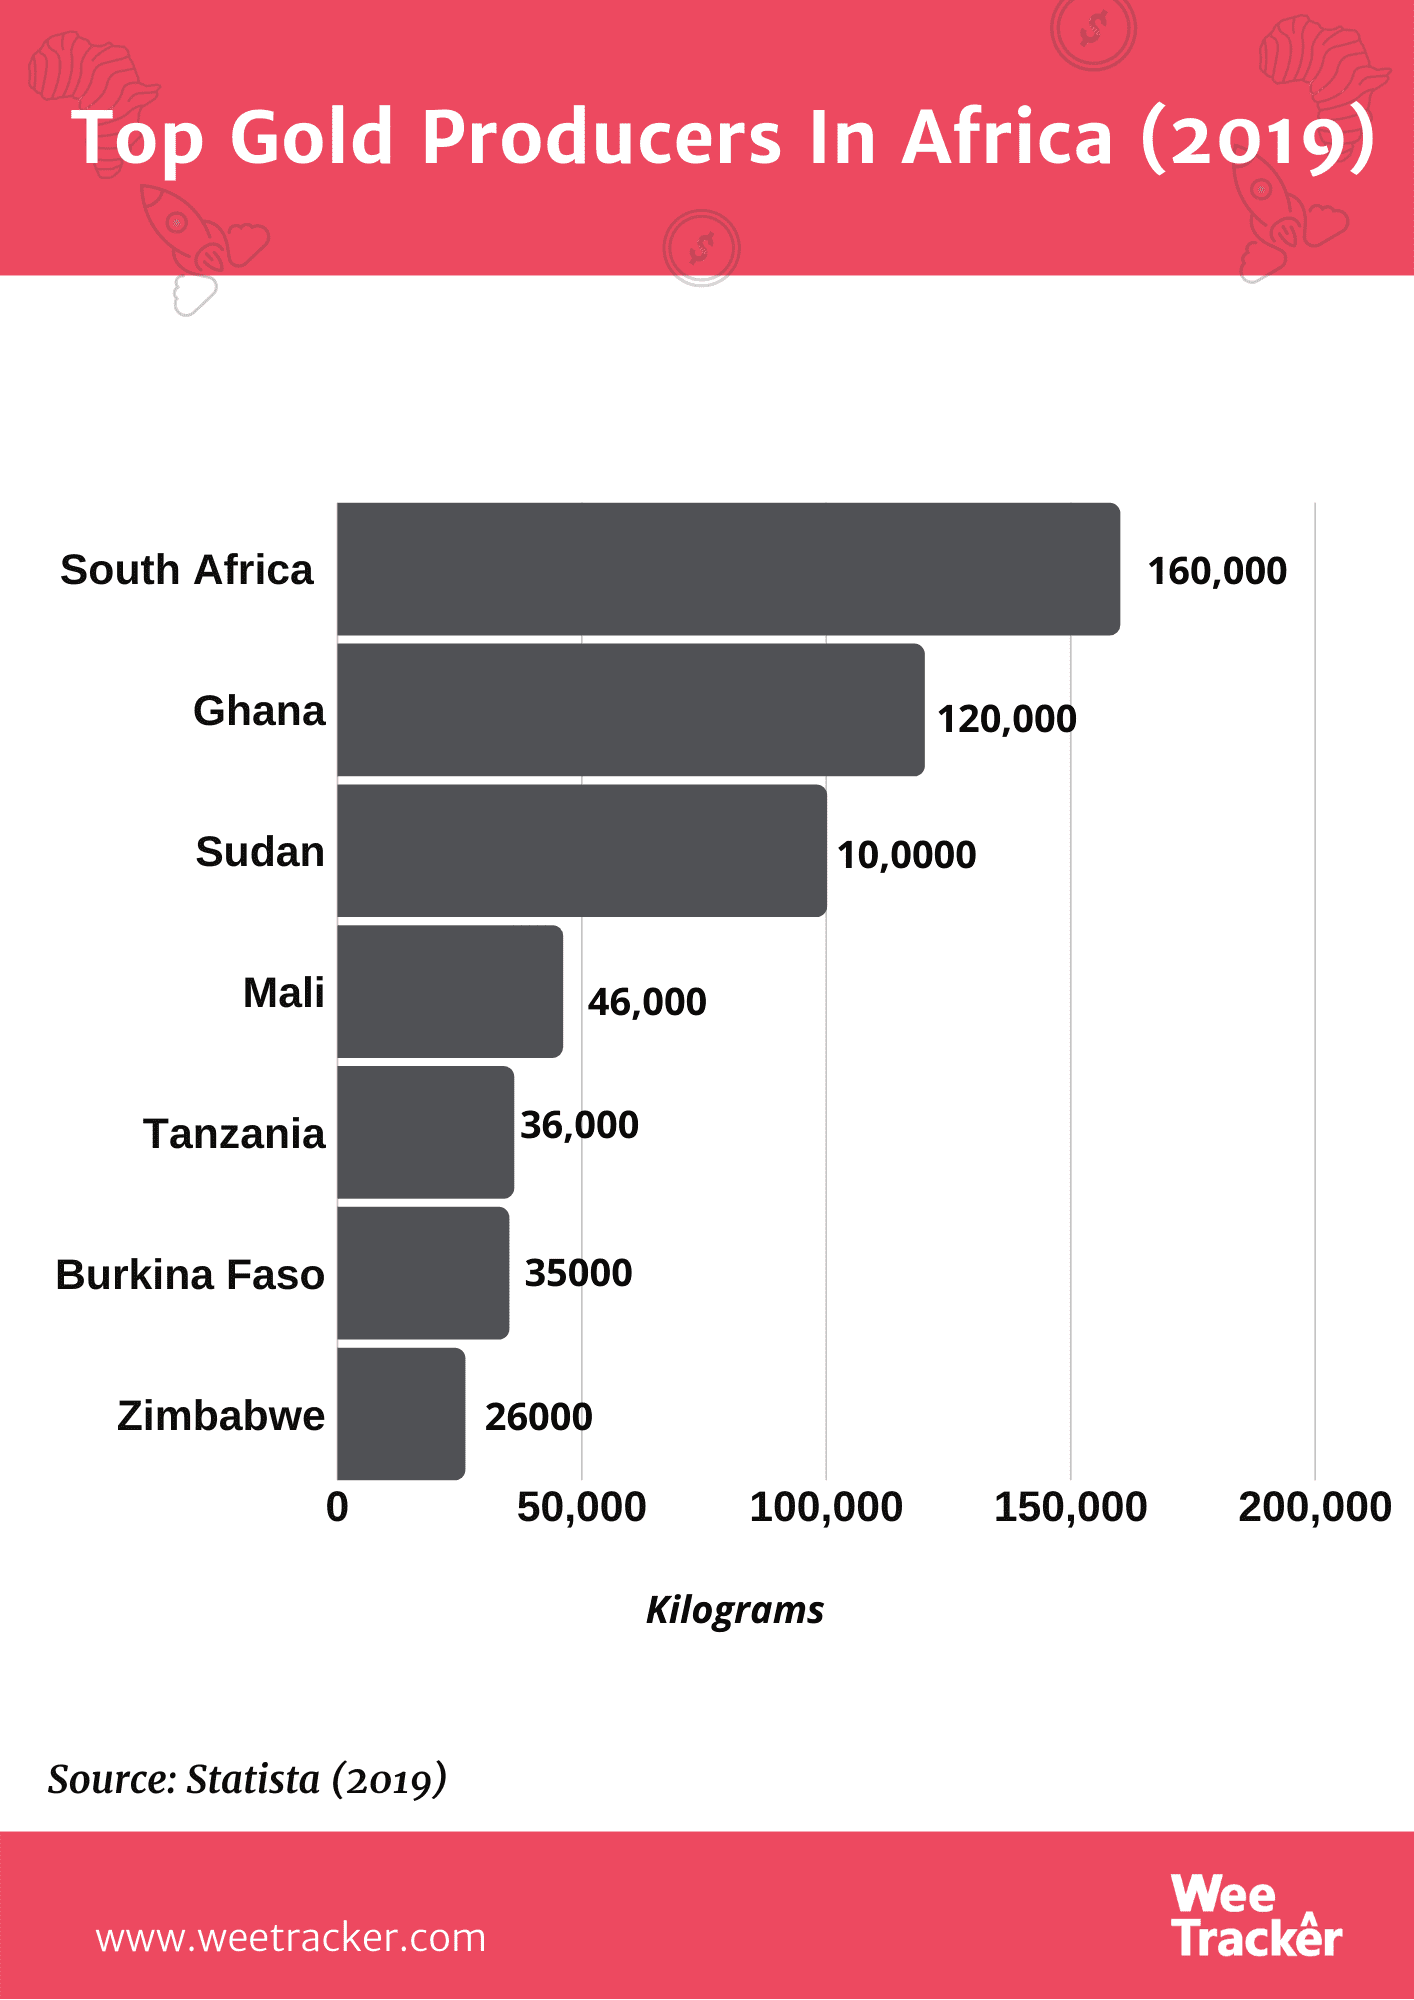 https://weetracker.com/wp-content/uploads/2020/05/Top-Gold-Producers-In-Africa-1.png